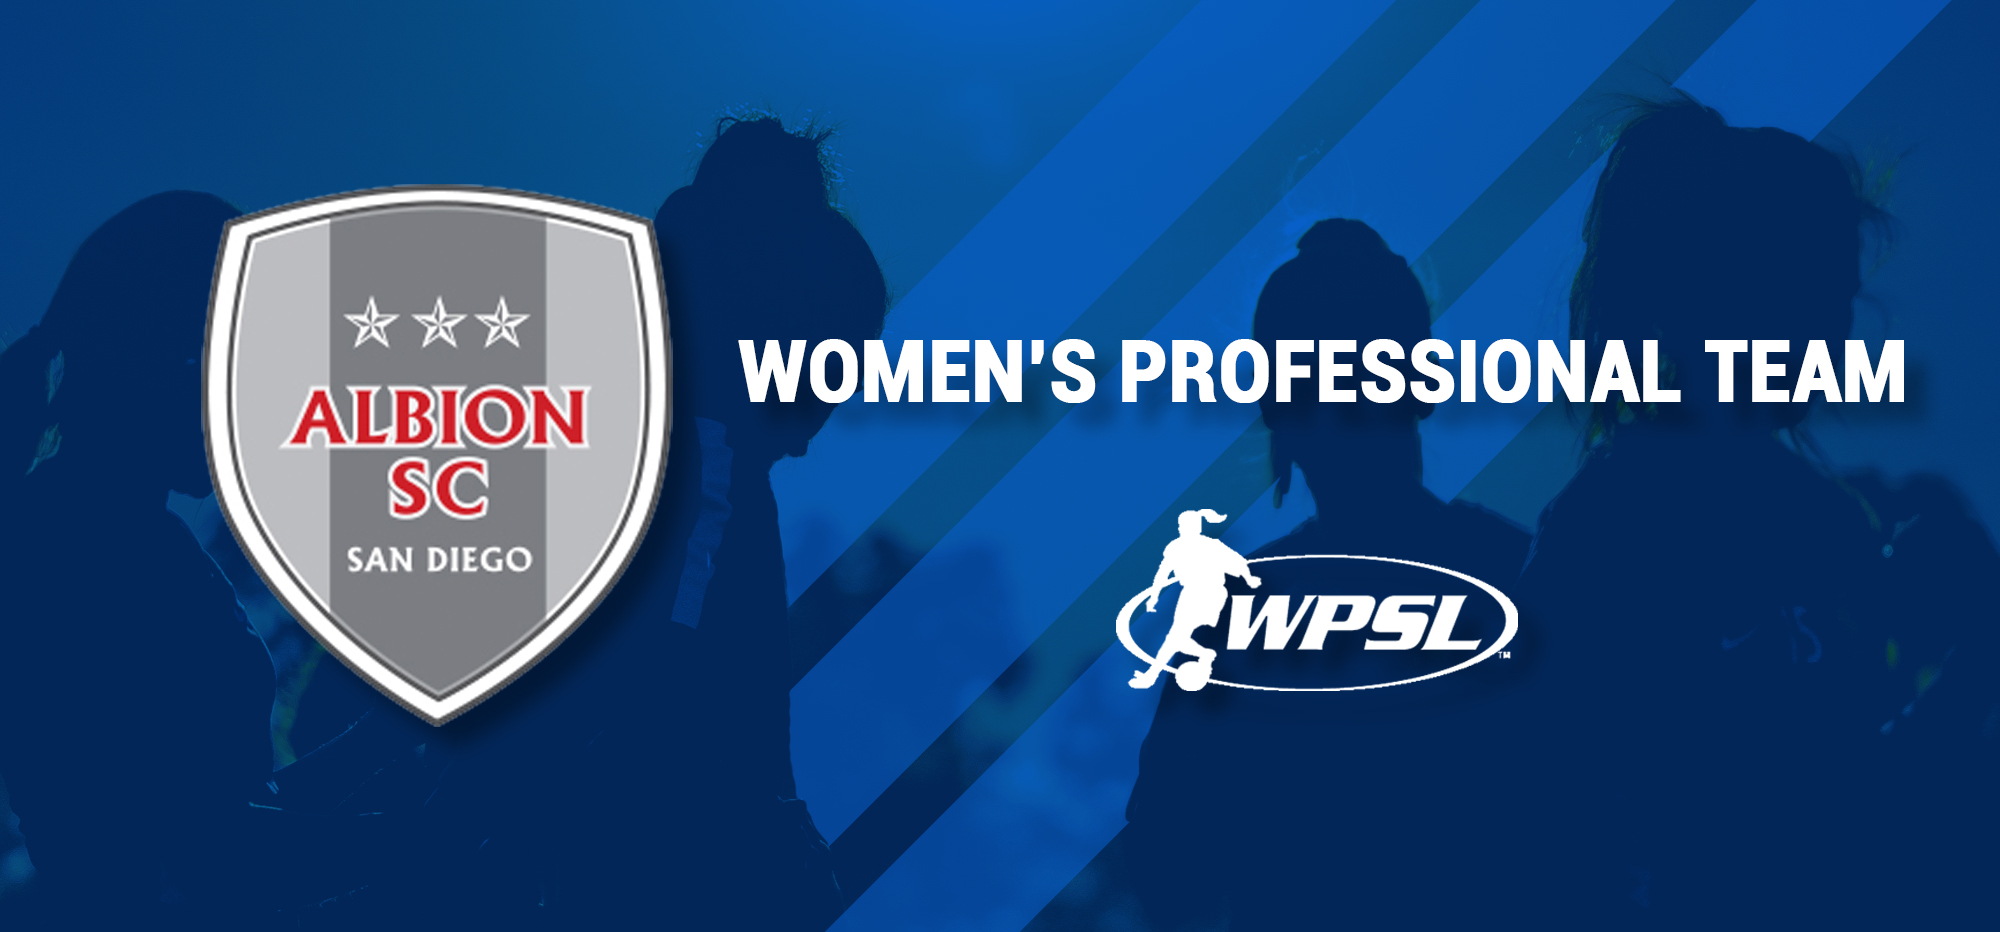 ALBION SC WILL NOW HAVE A WOMENS PROFESSIONAL TEAM TO SIT ATOP THE GIRLS US DEVELOPMENT ACADEMY. 